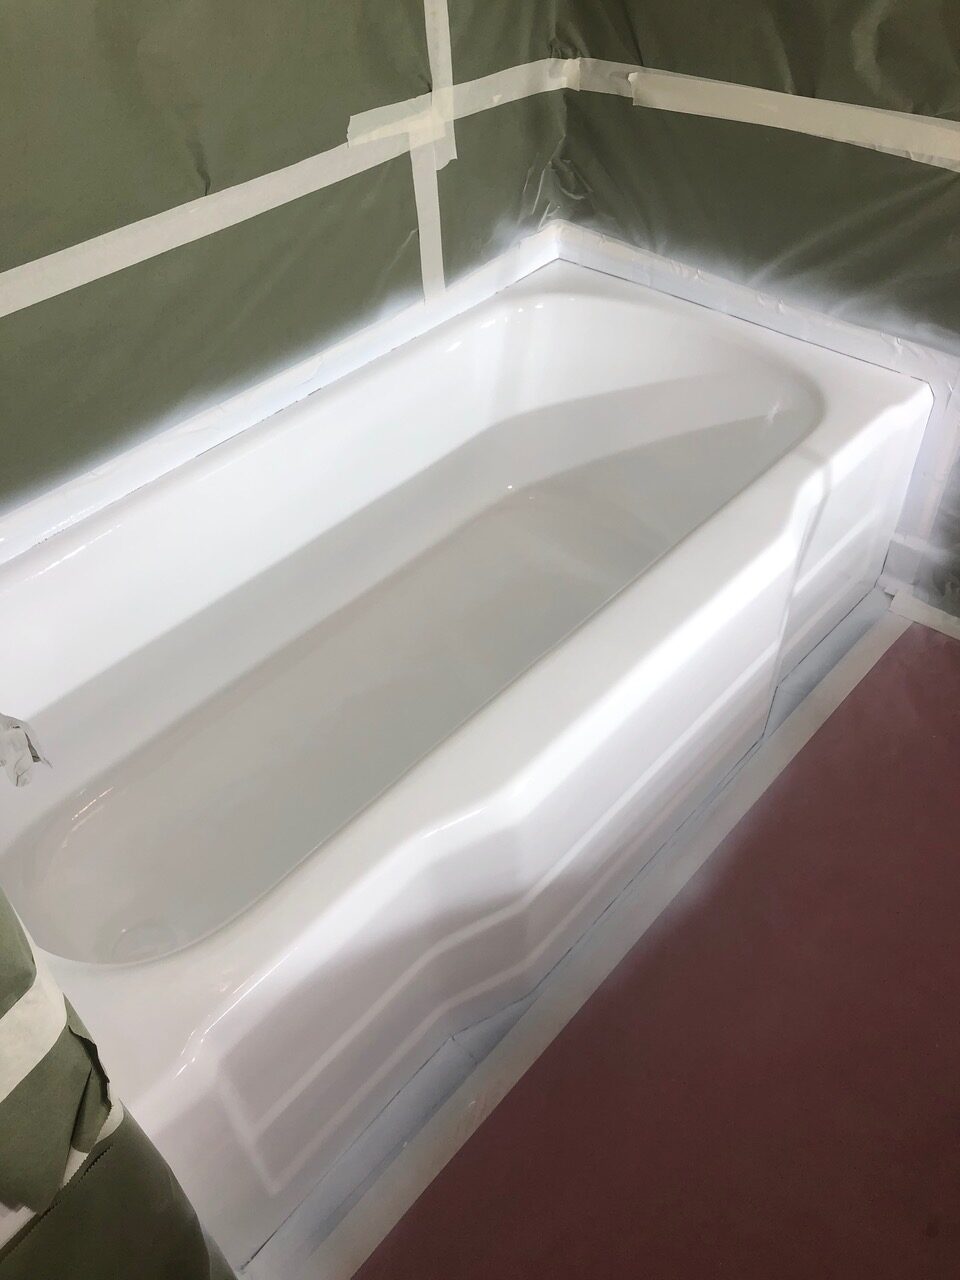 A bathtub that is sitting in the middle of a room.